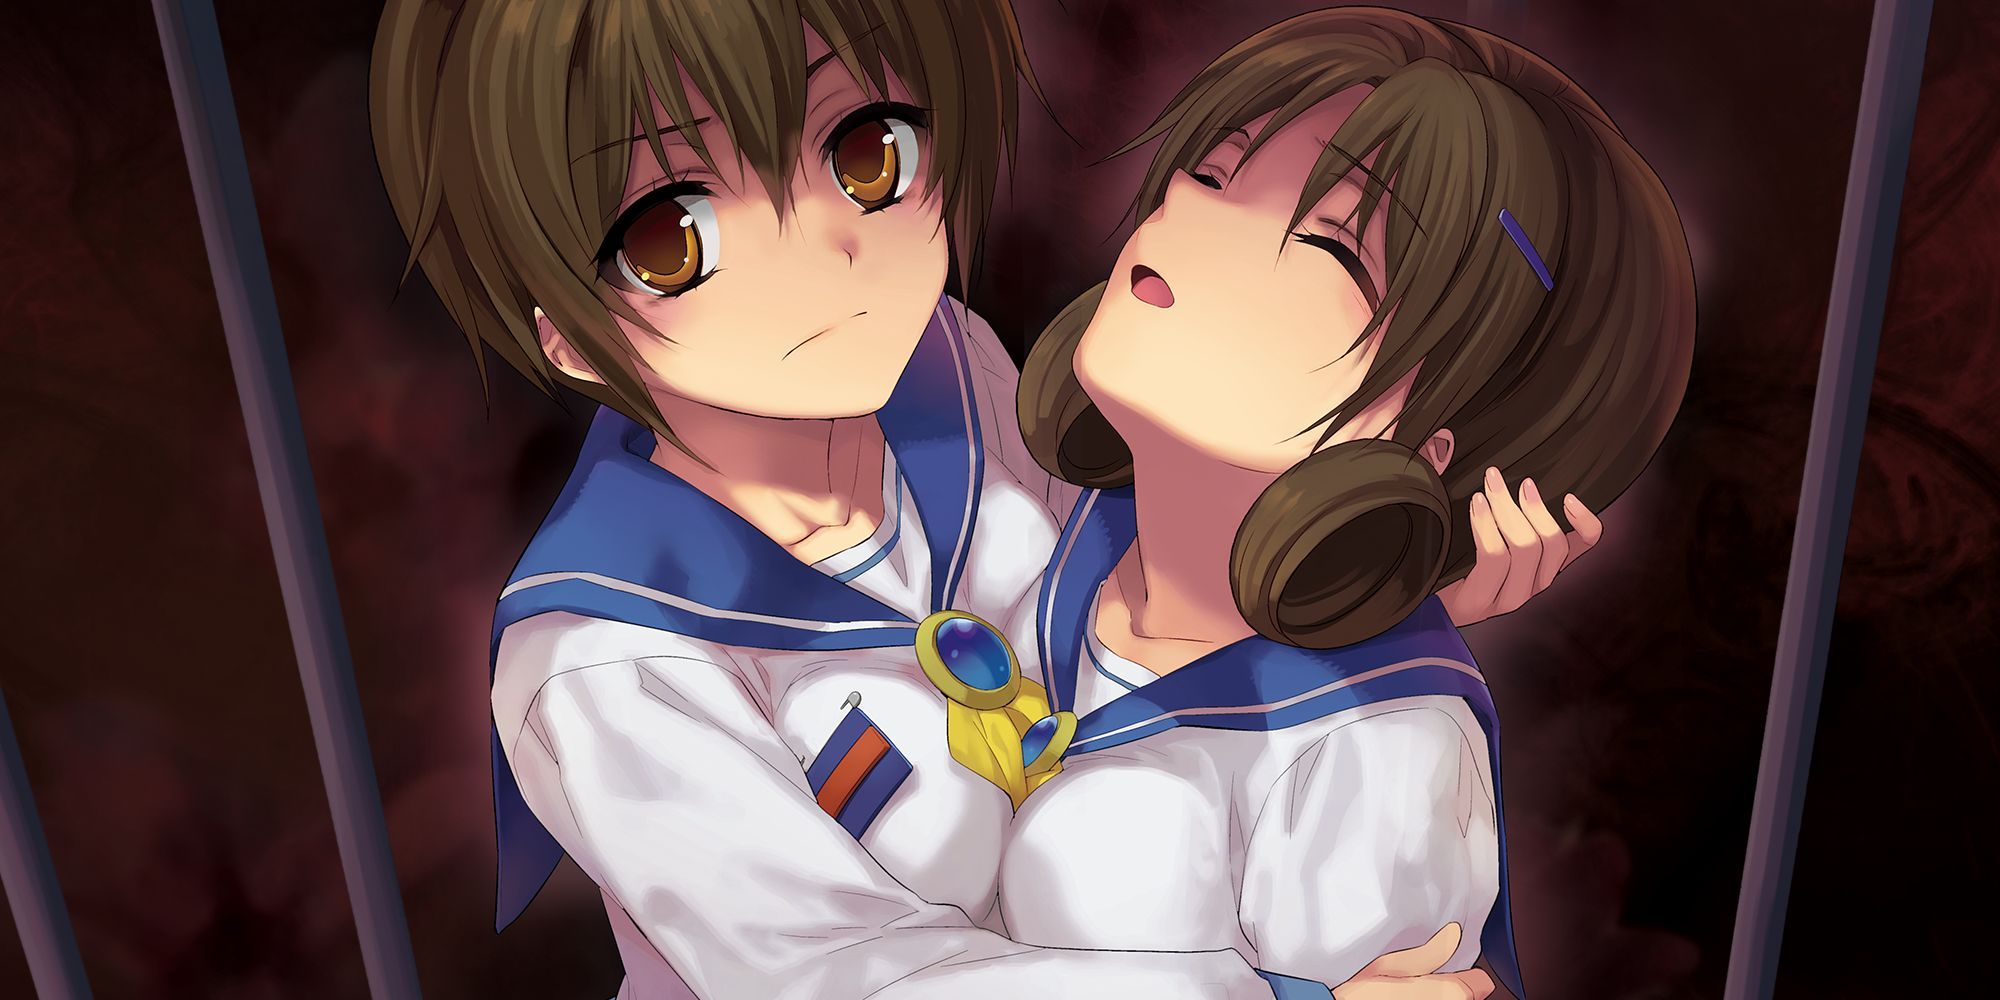 MAGES Confirms New Corpse Party Game Will Be Releasing Worldwide